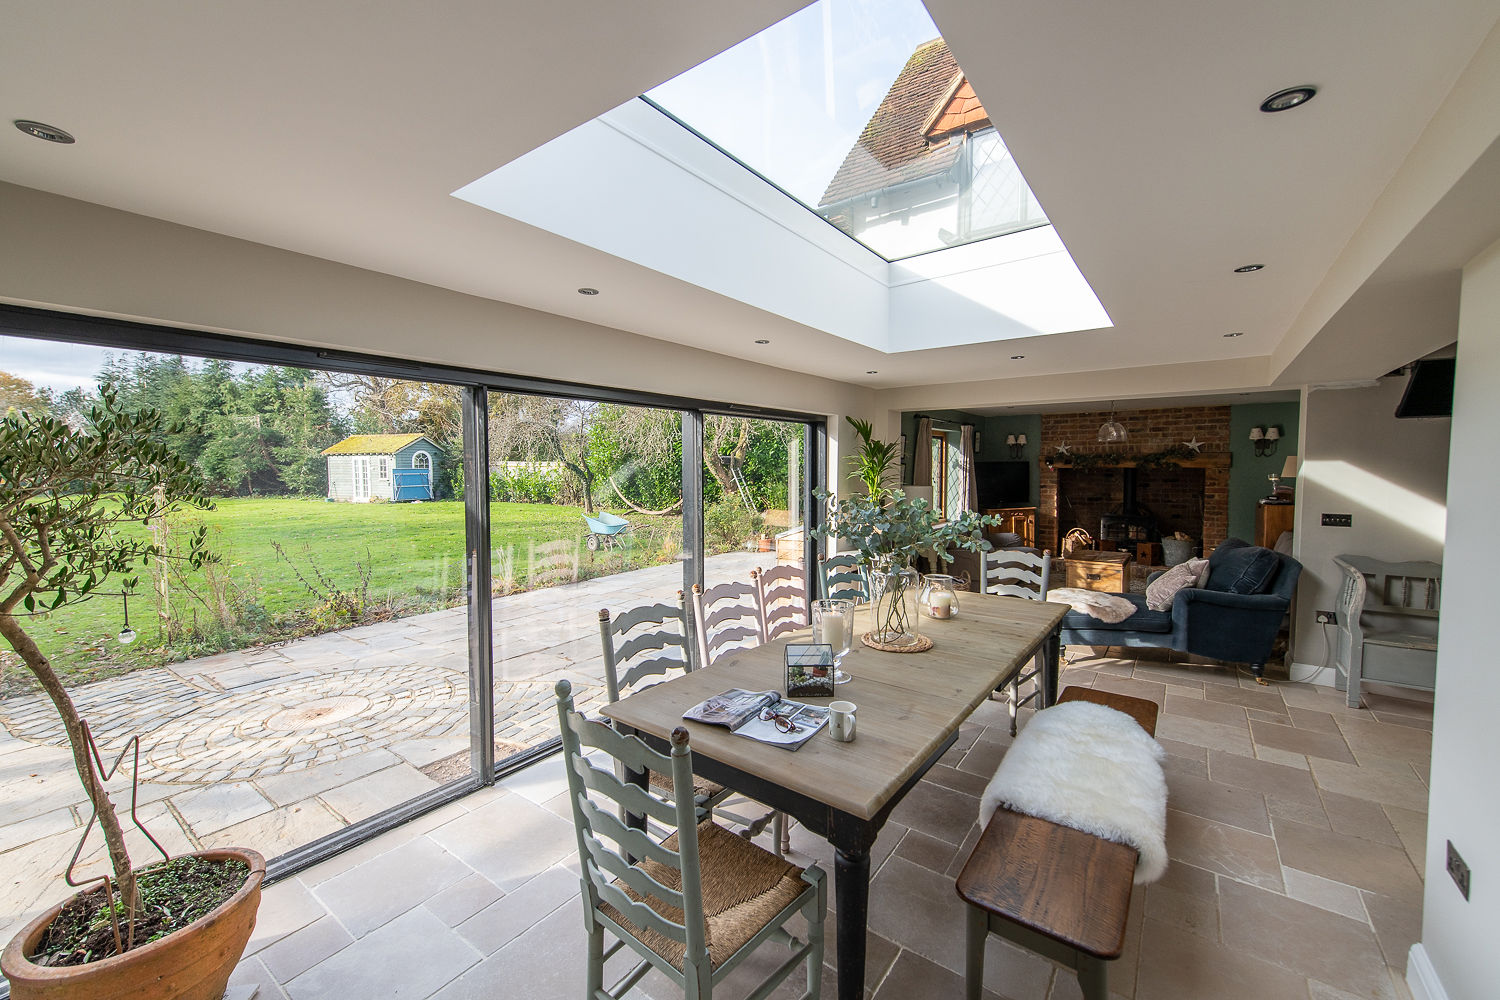 Discover 8 things a rooflight can do for you